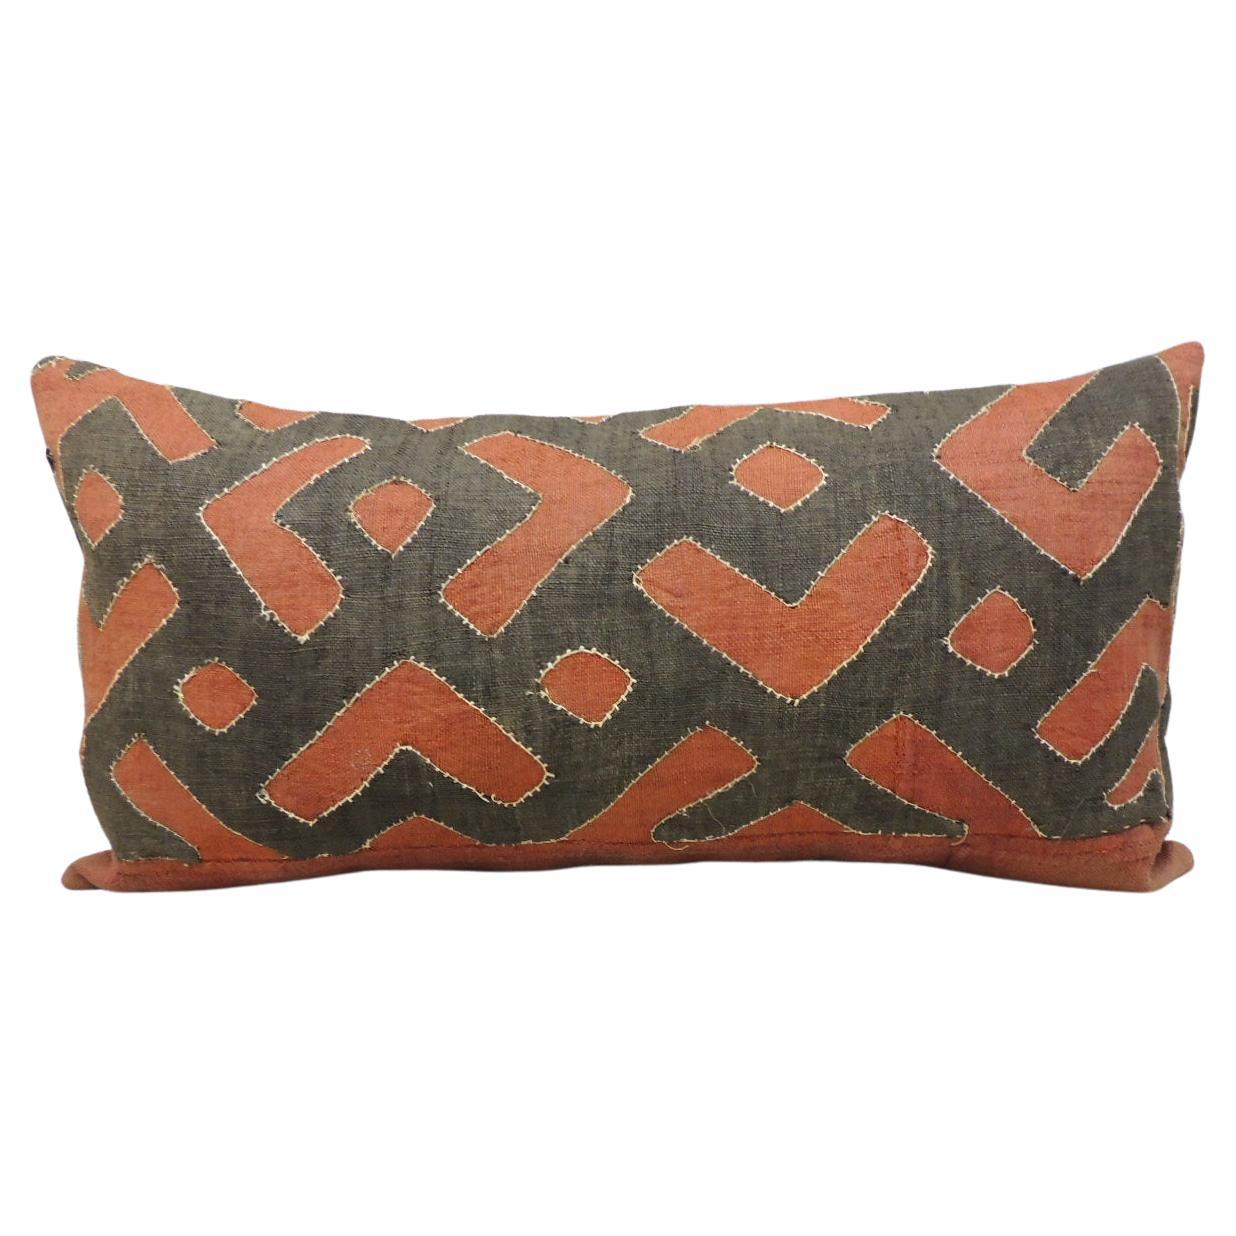 Vintage Black and Red Woven African Kuba Textile Decorative Bolster Pillow